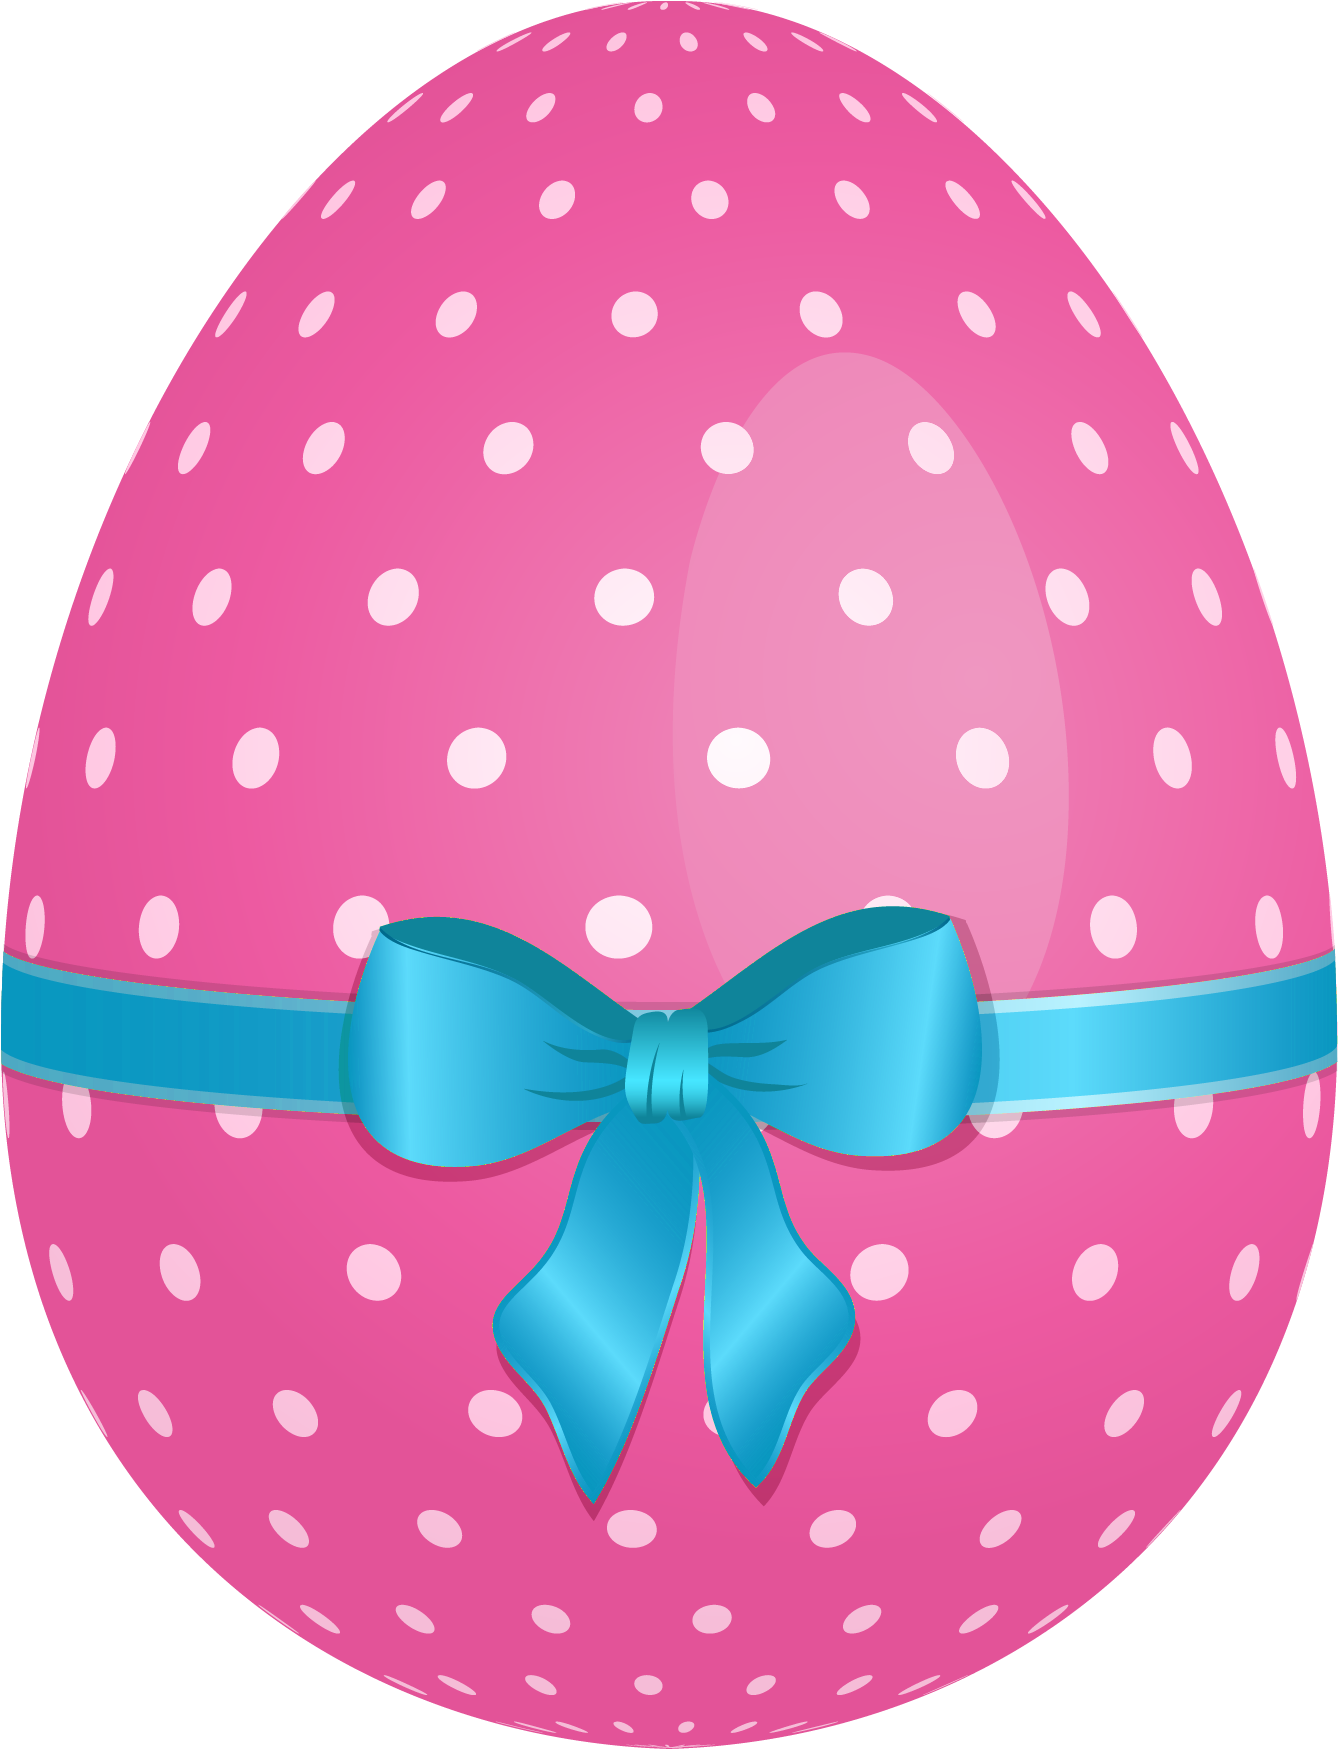 On Plate Easter Egg Clipart - Easter Eggs With Bows (1458x1818)